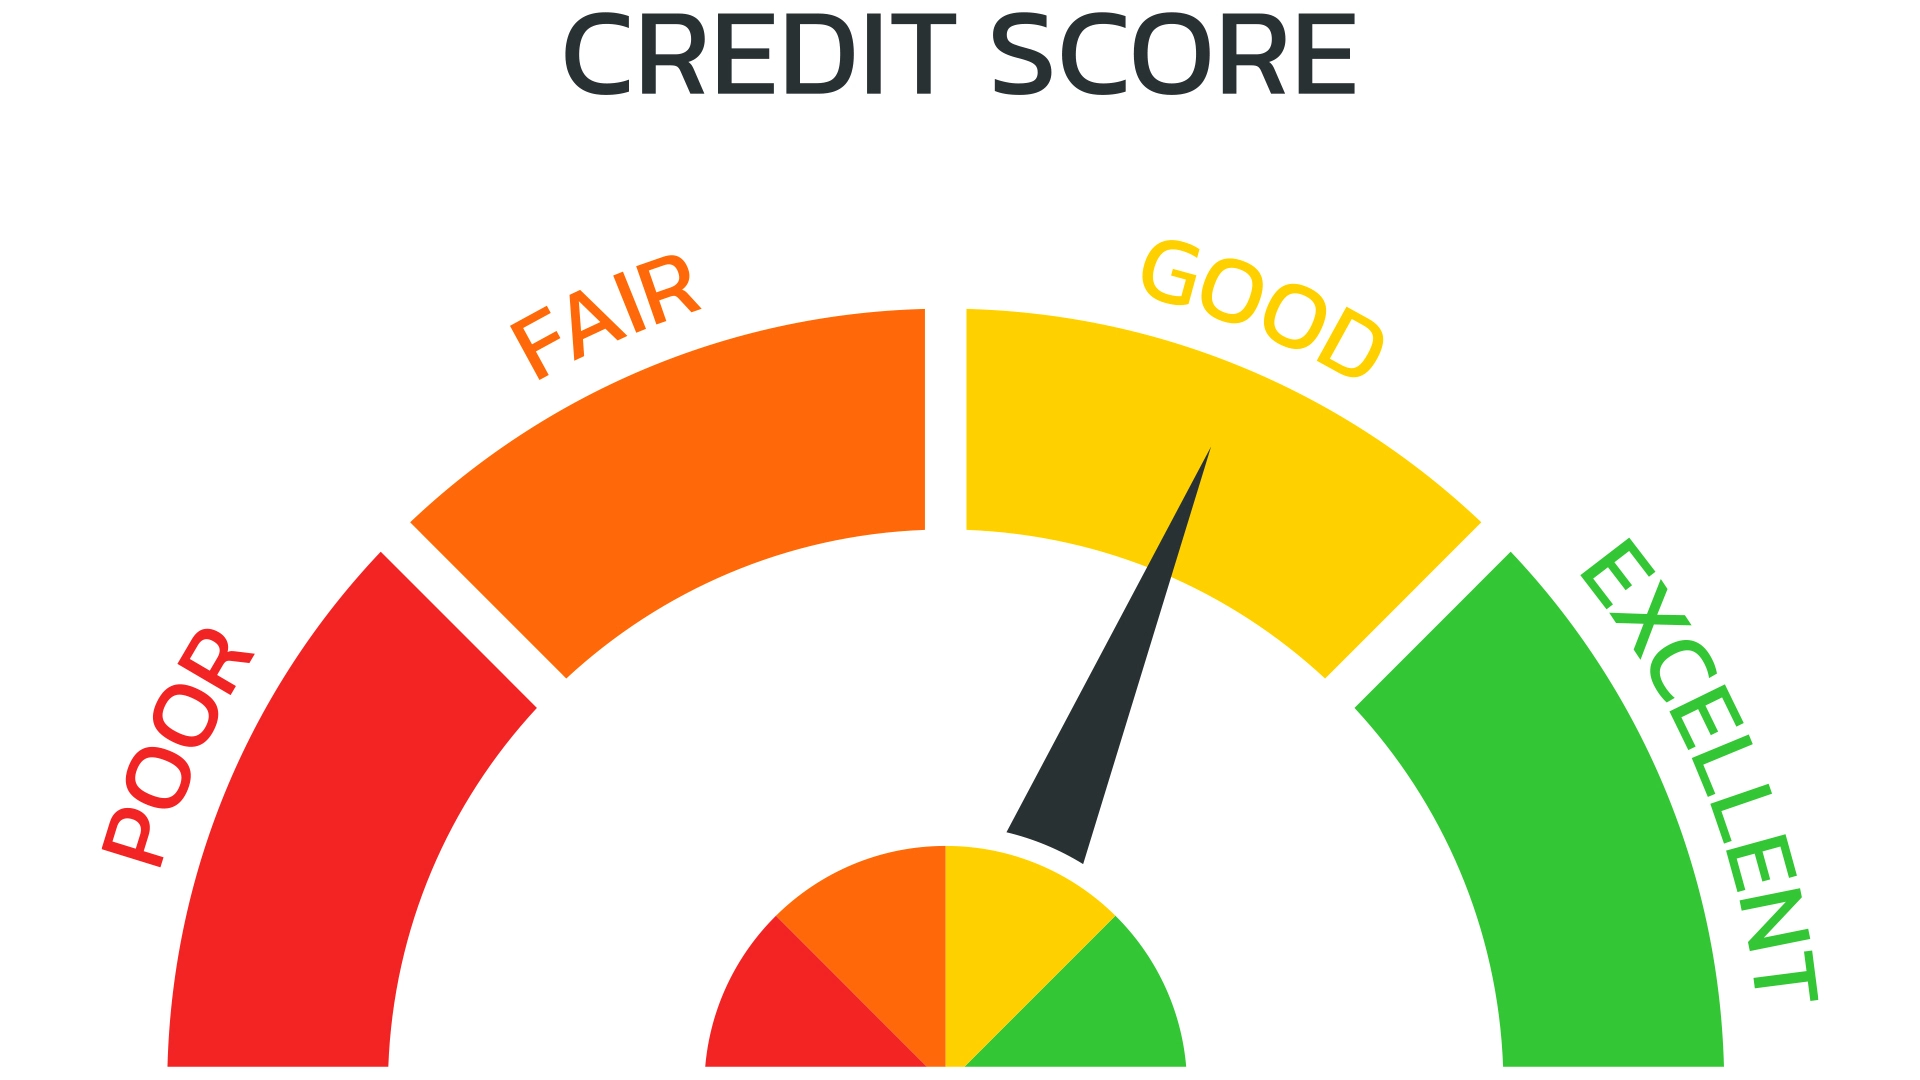 Illegal ways to change a credit score